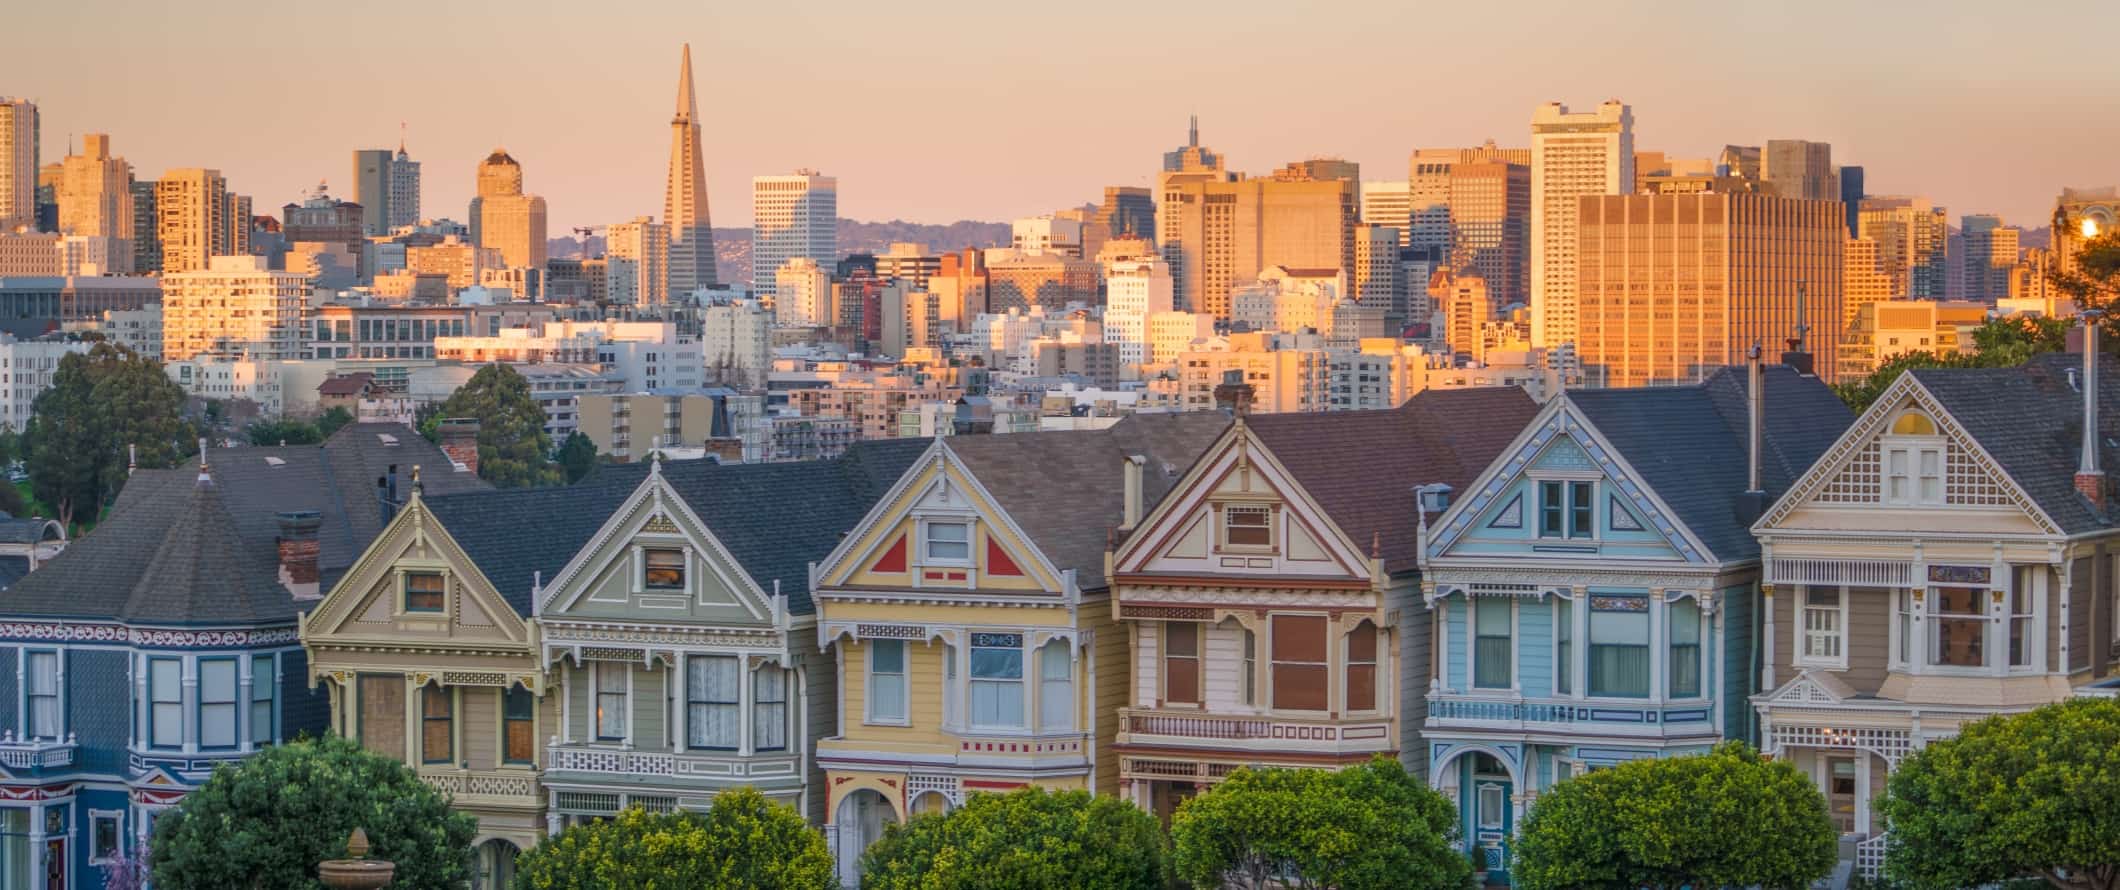 View of the Painted Ladies, iconic, pastel-colored Victorian houses with the downtown San Francisco skyline in the background in San Francisco, California.